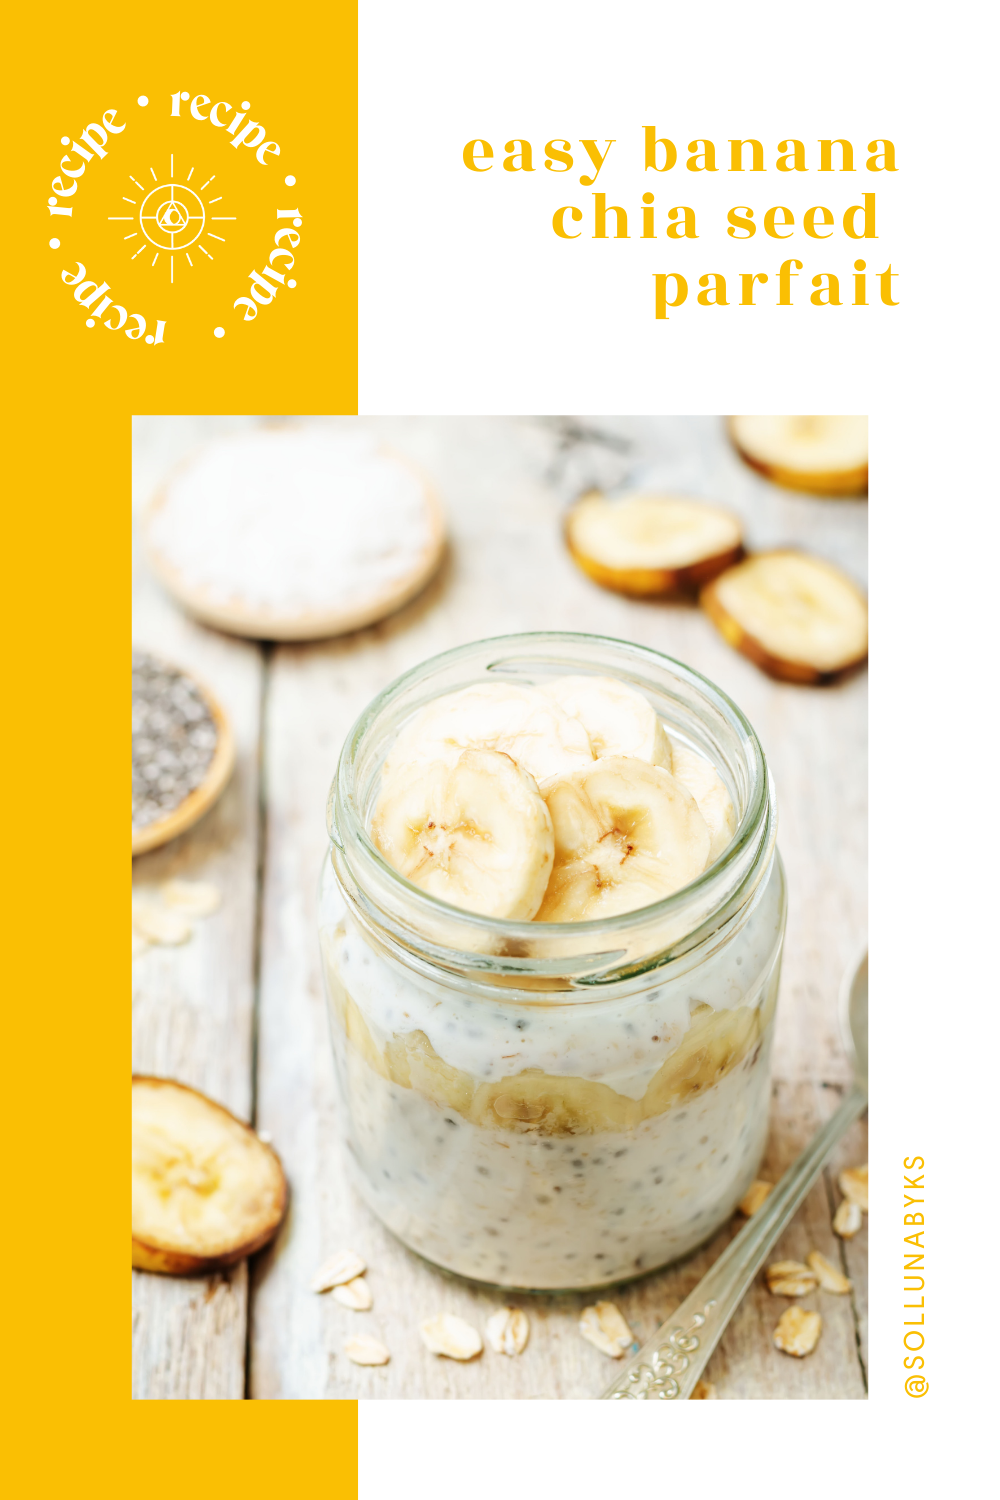 An easy banana chia seed parfait, served in a mason jar next to chia seeds and banana slices.